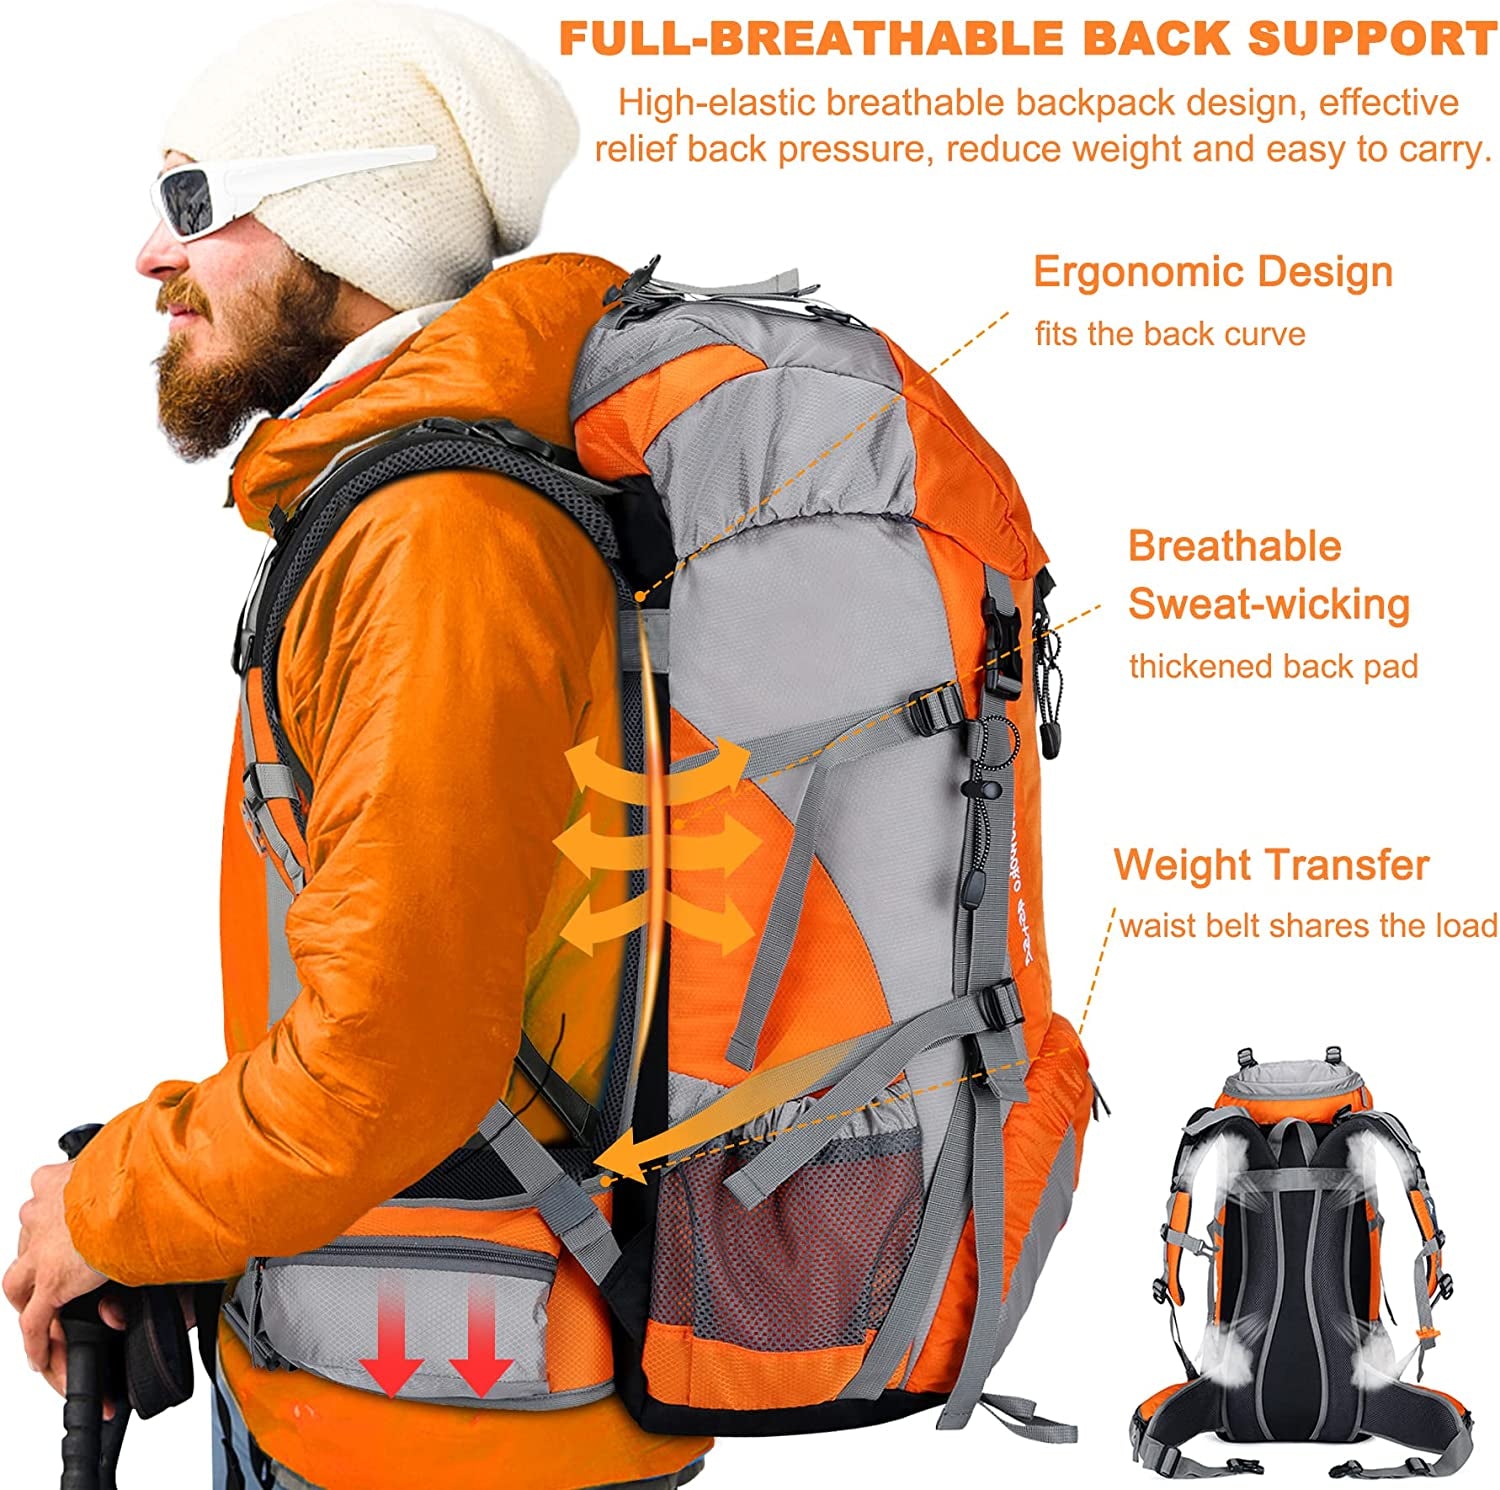 "Premium All-Weather Hiking Backpack - Loowoko 50L: Stay Dry and Equipped with the Waterproof Camping Essentials Bag, Complete with Rain Cover. Enjoy Unparalleled Comfort and Convenience with this Lightweight 45+5 Liter Backpacking Backpack!"